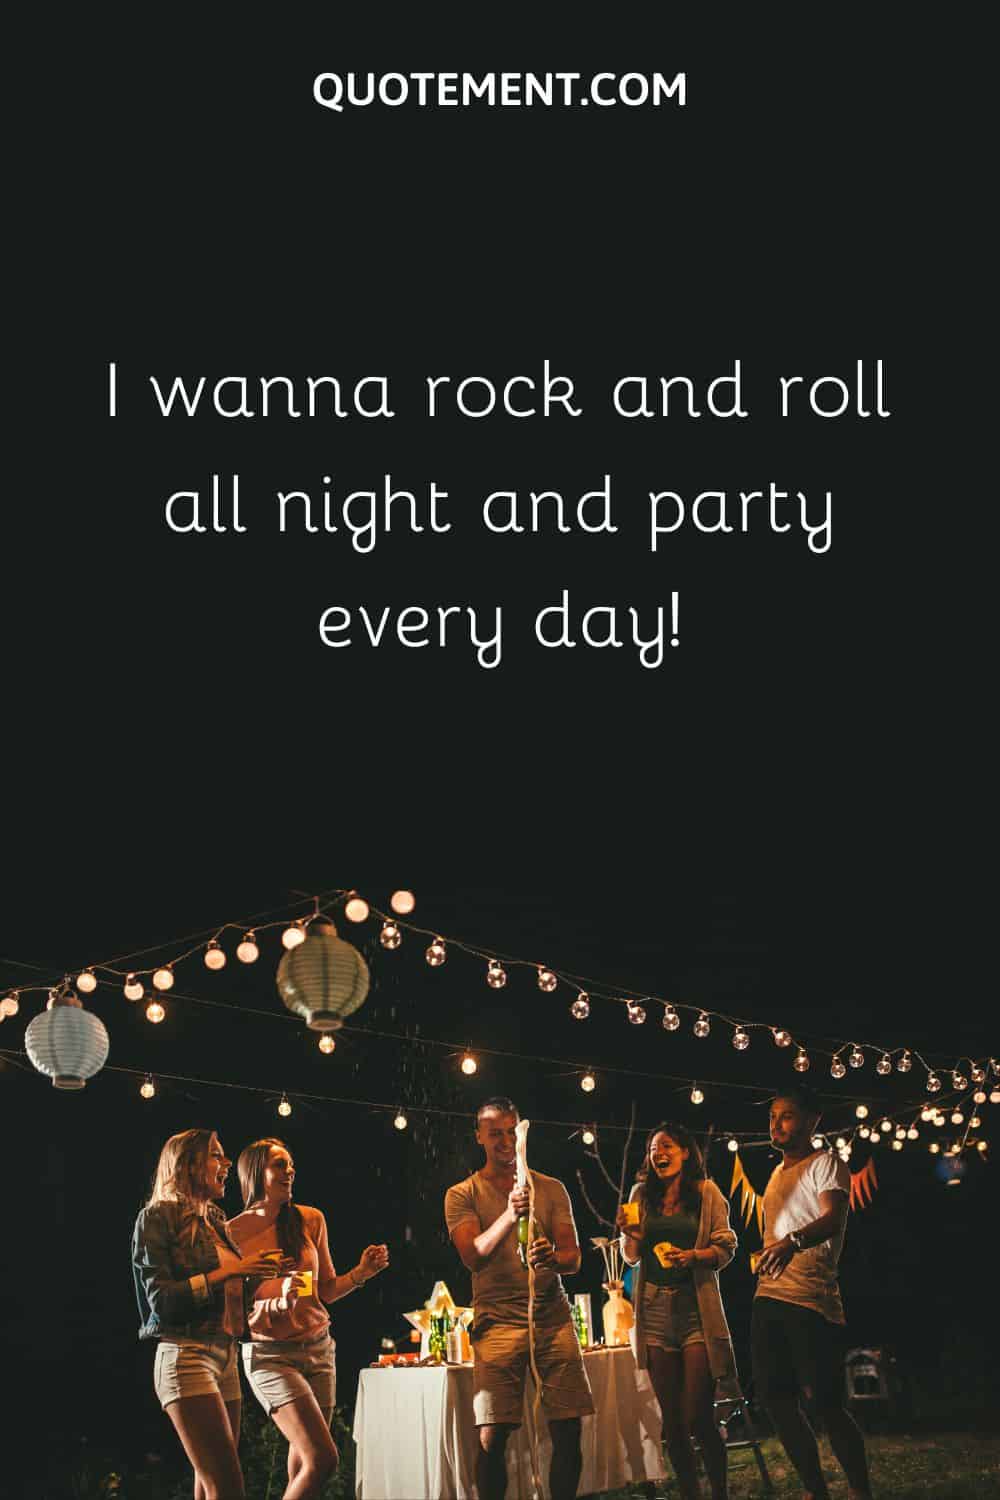 I wanna rock and roll all night and party every day